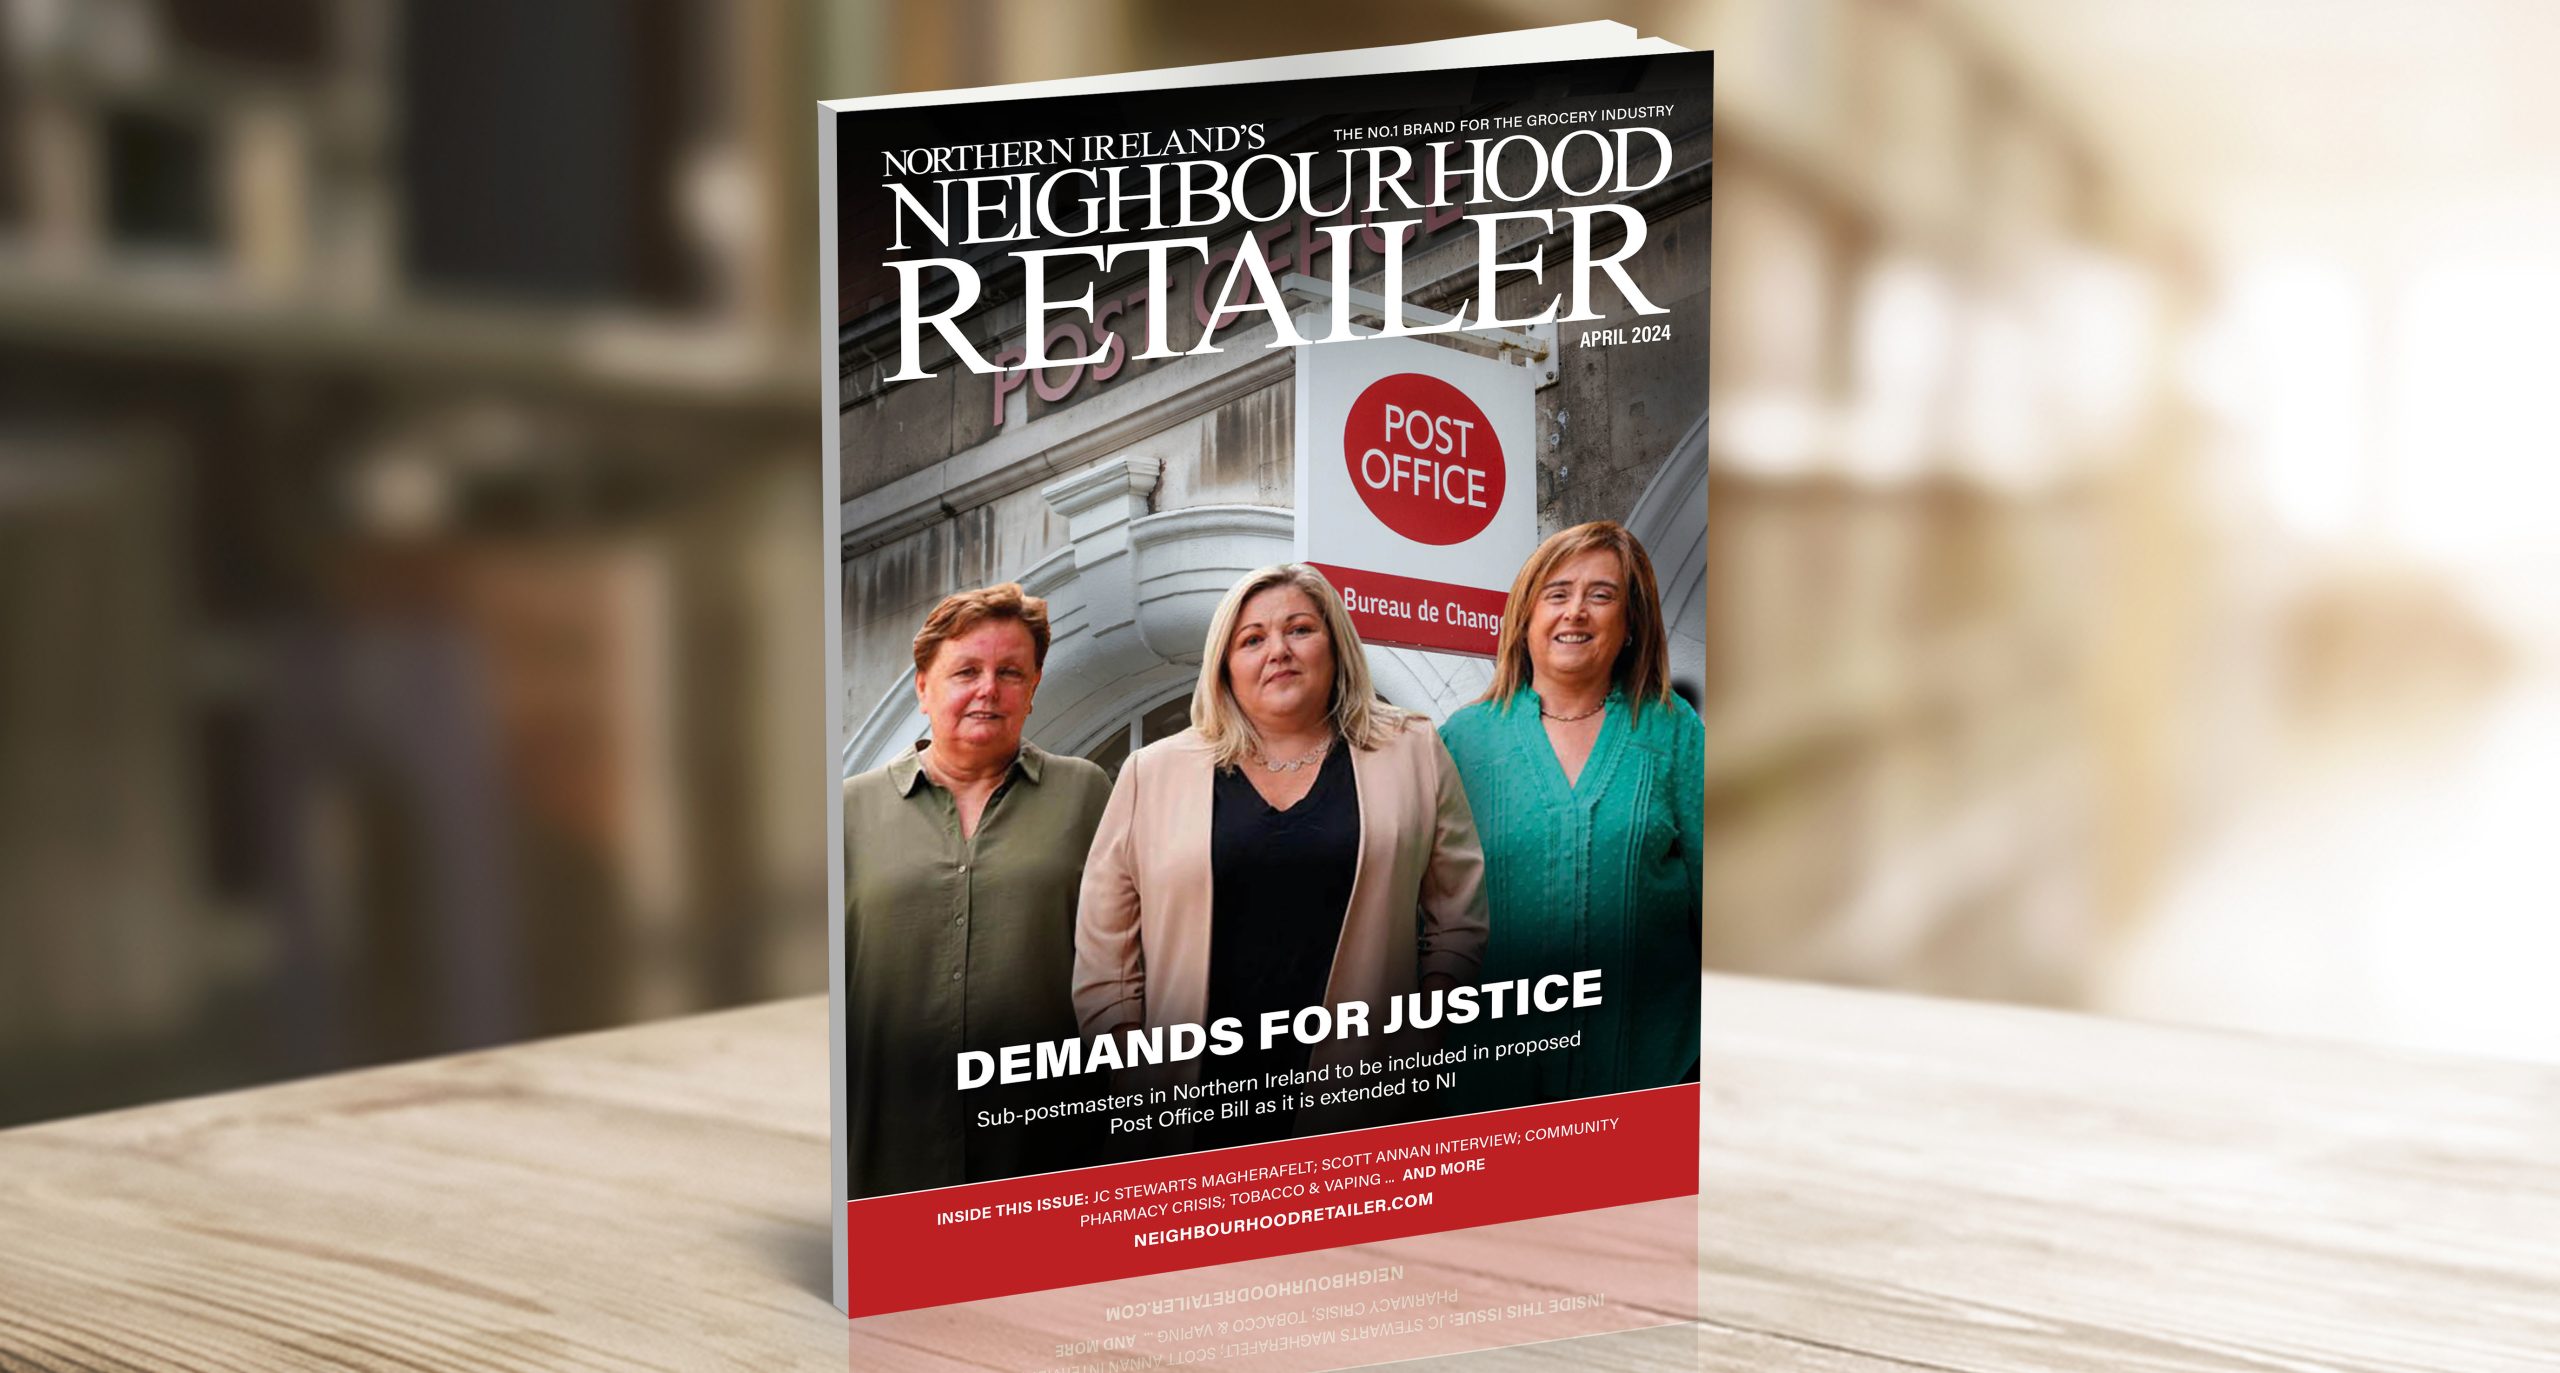 Spring into the latest issue of Neighbourhood Retailer – out now!